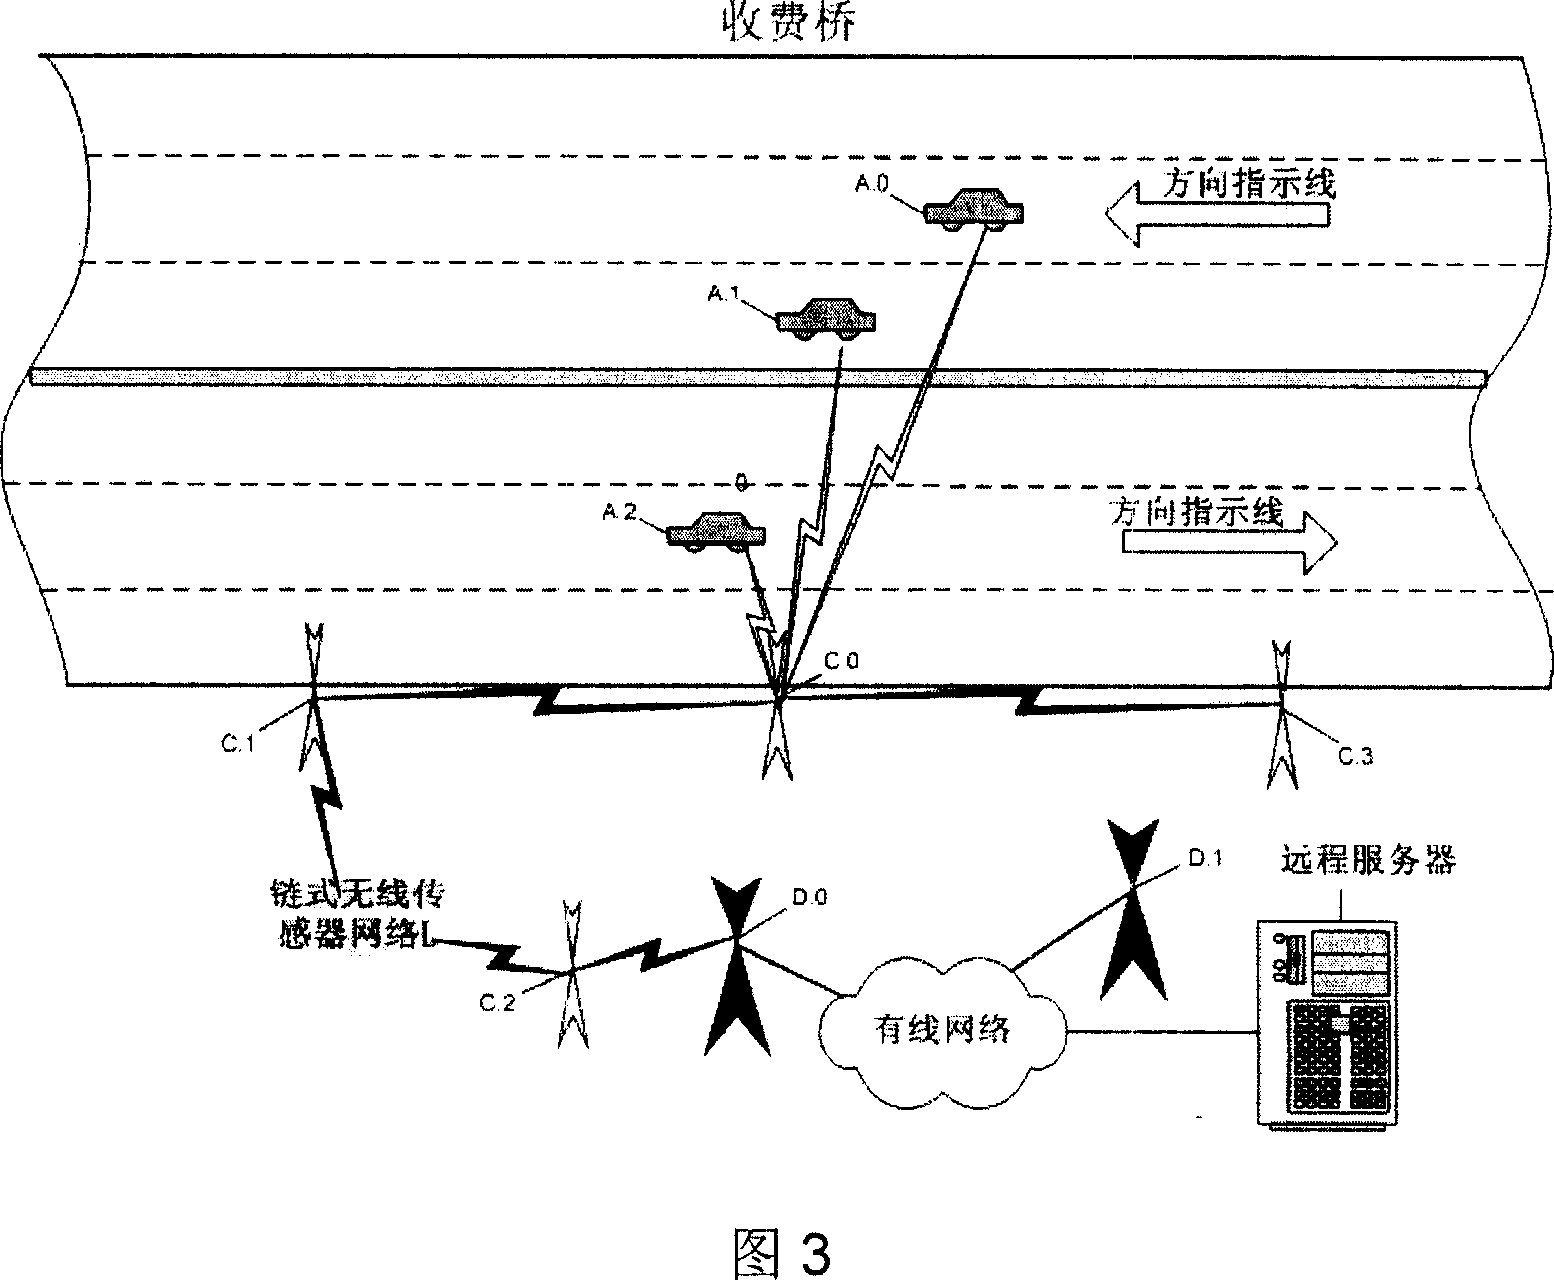 Road and vehicle managing system and method based on radio sensor network